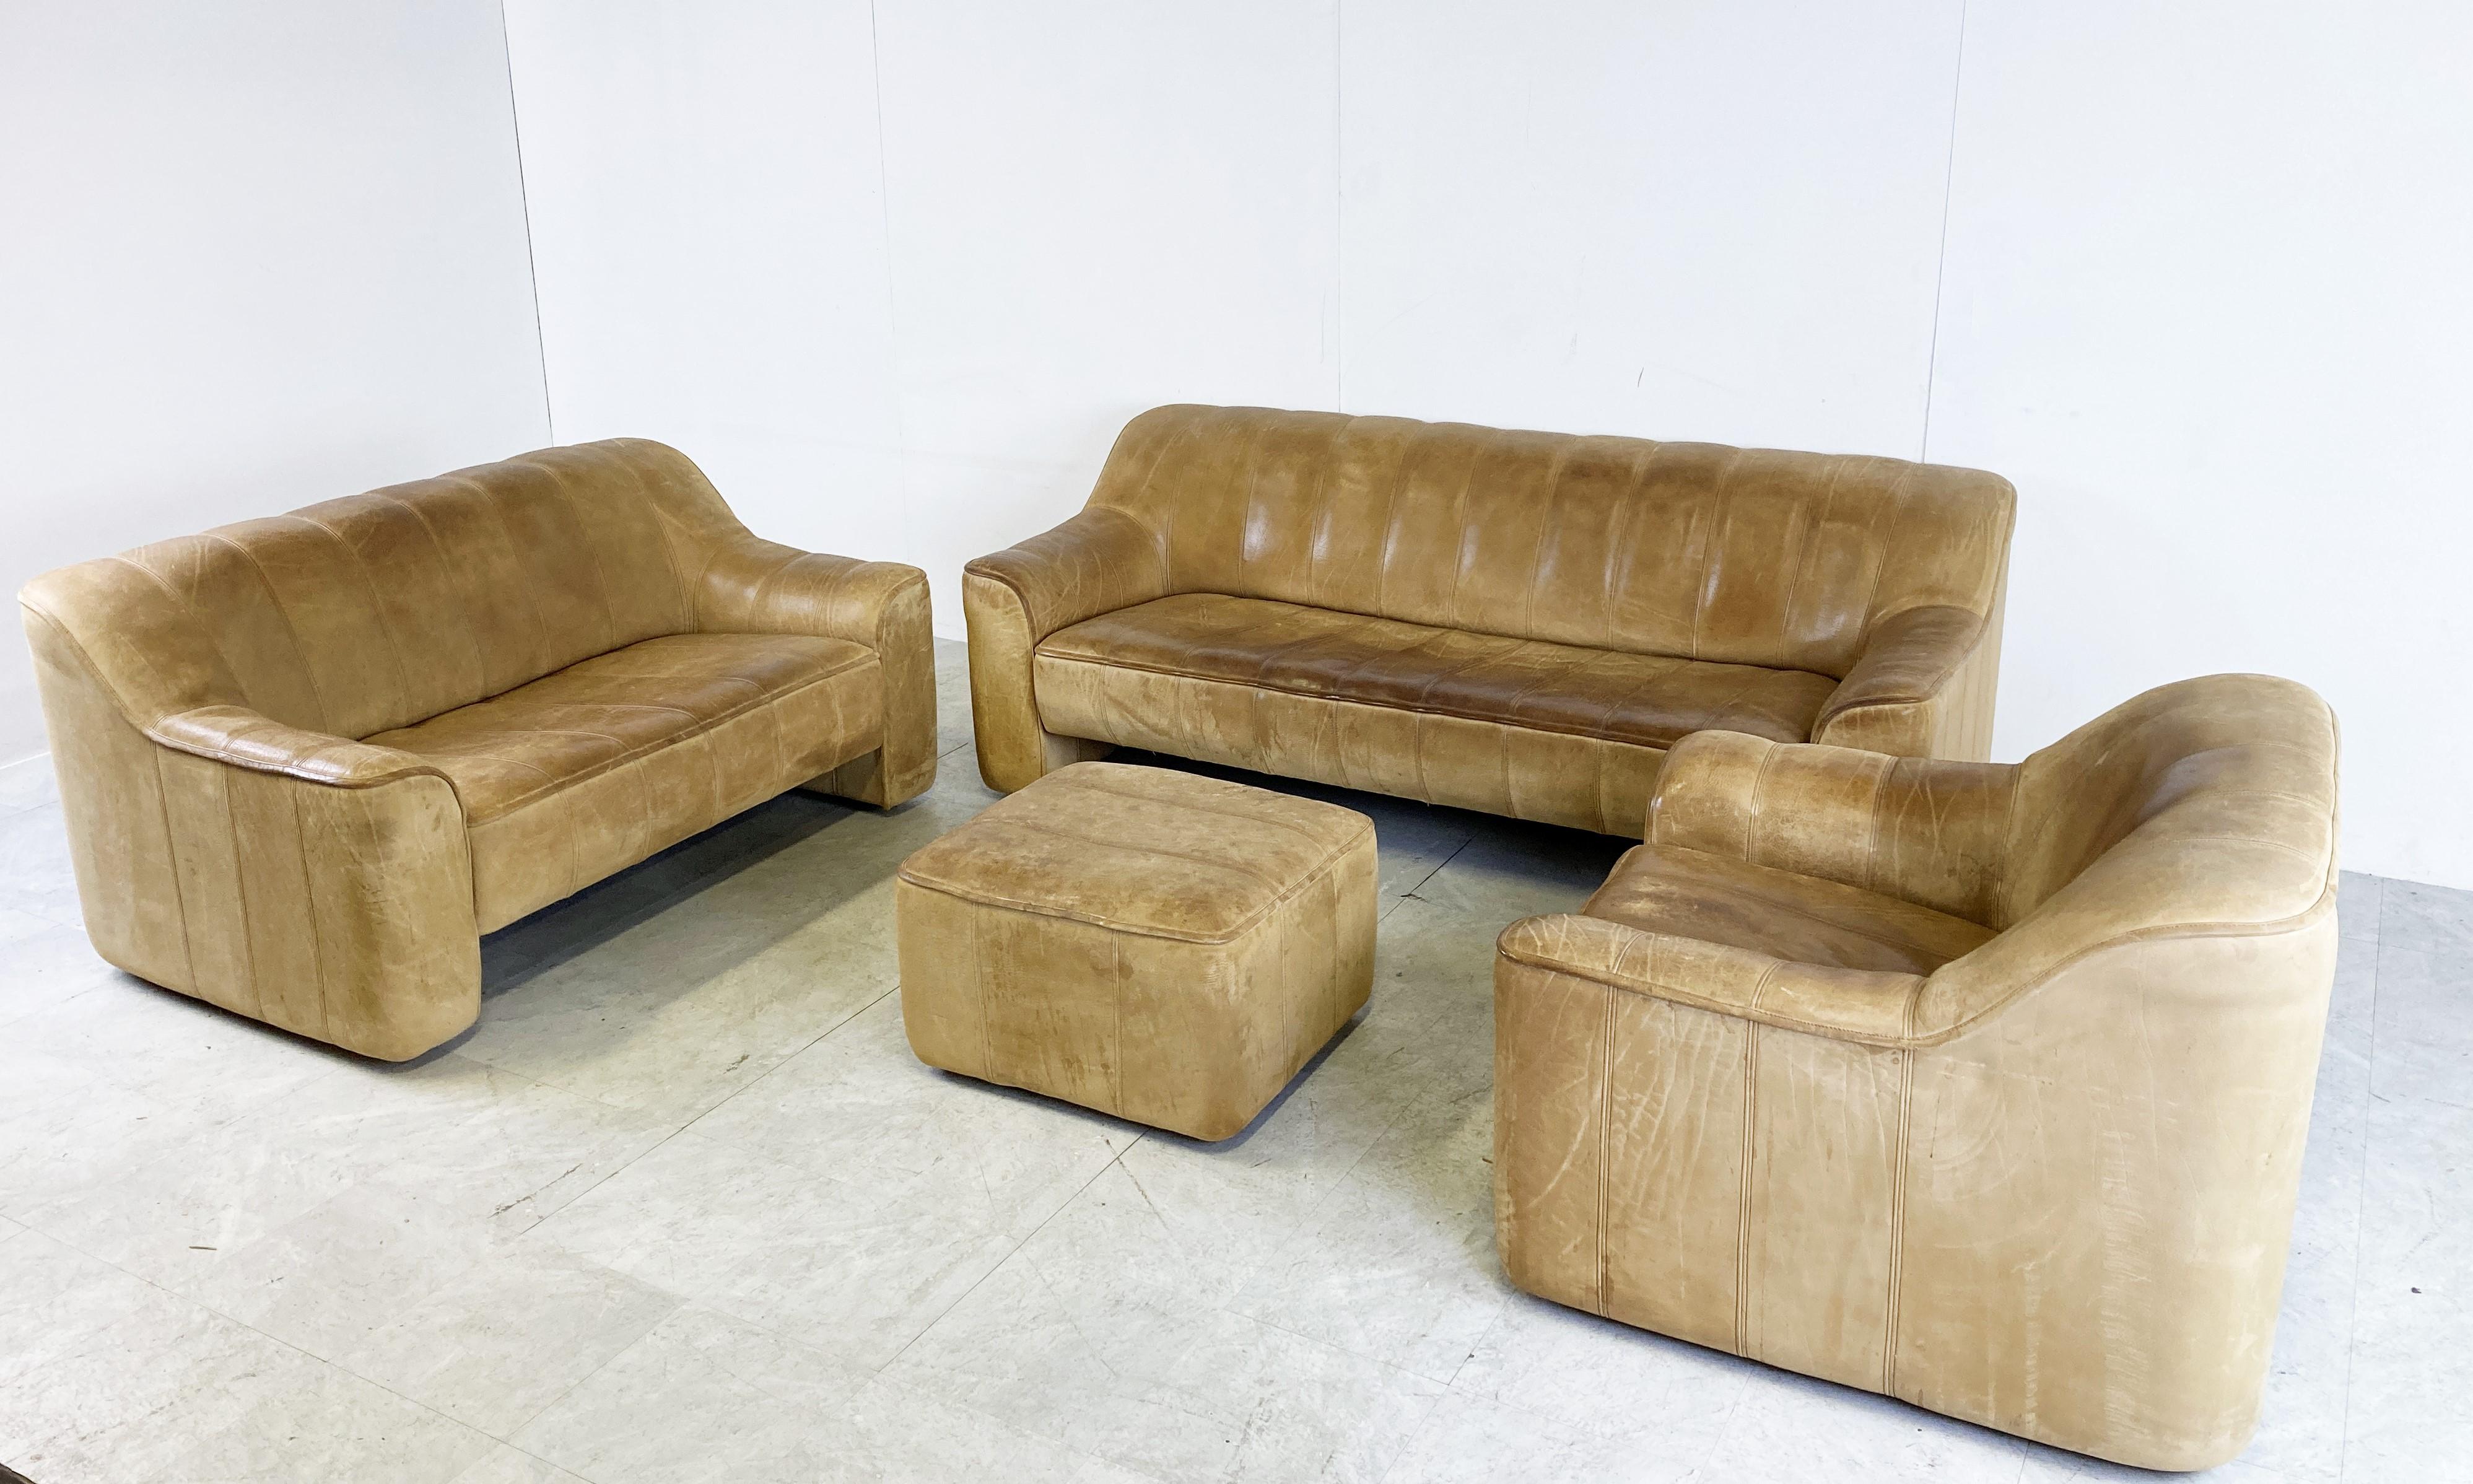 Set of gorgeous leather DS44 sofas from De Sede.

De Sede, renowned for using the best quality leather has created some wonderful sofas.

These are no exception and the beautiful, thick Neck leather will be ever lasting.

Combined with the